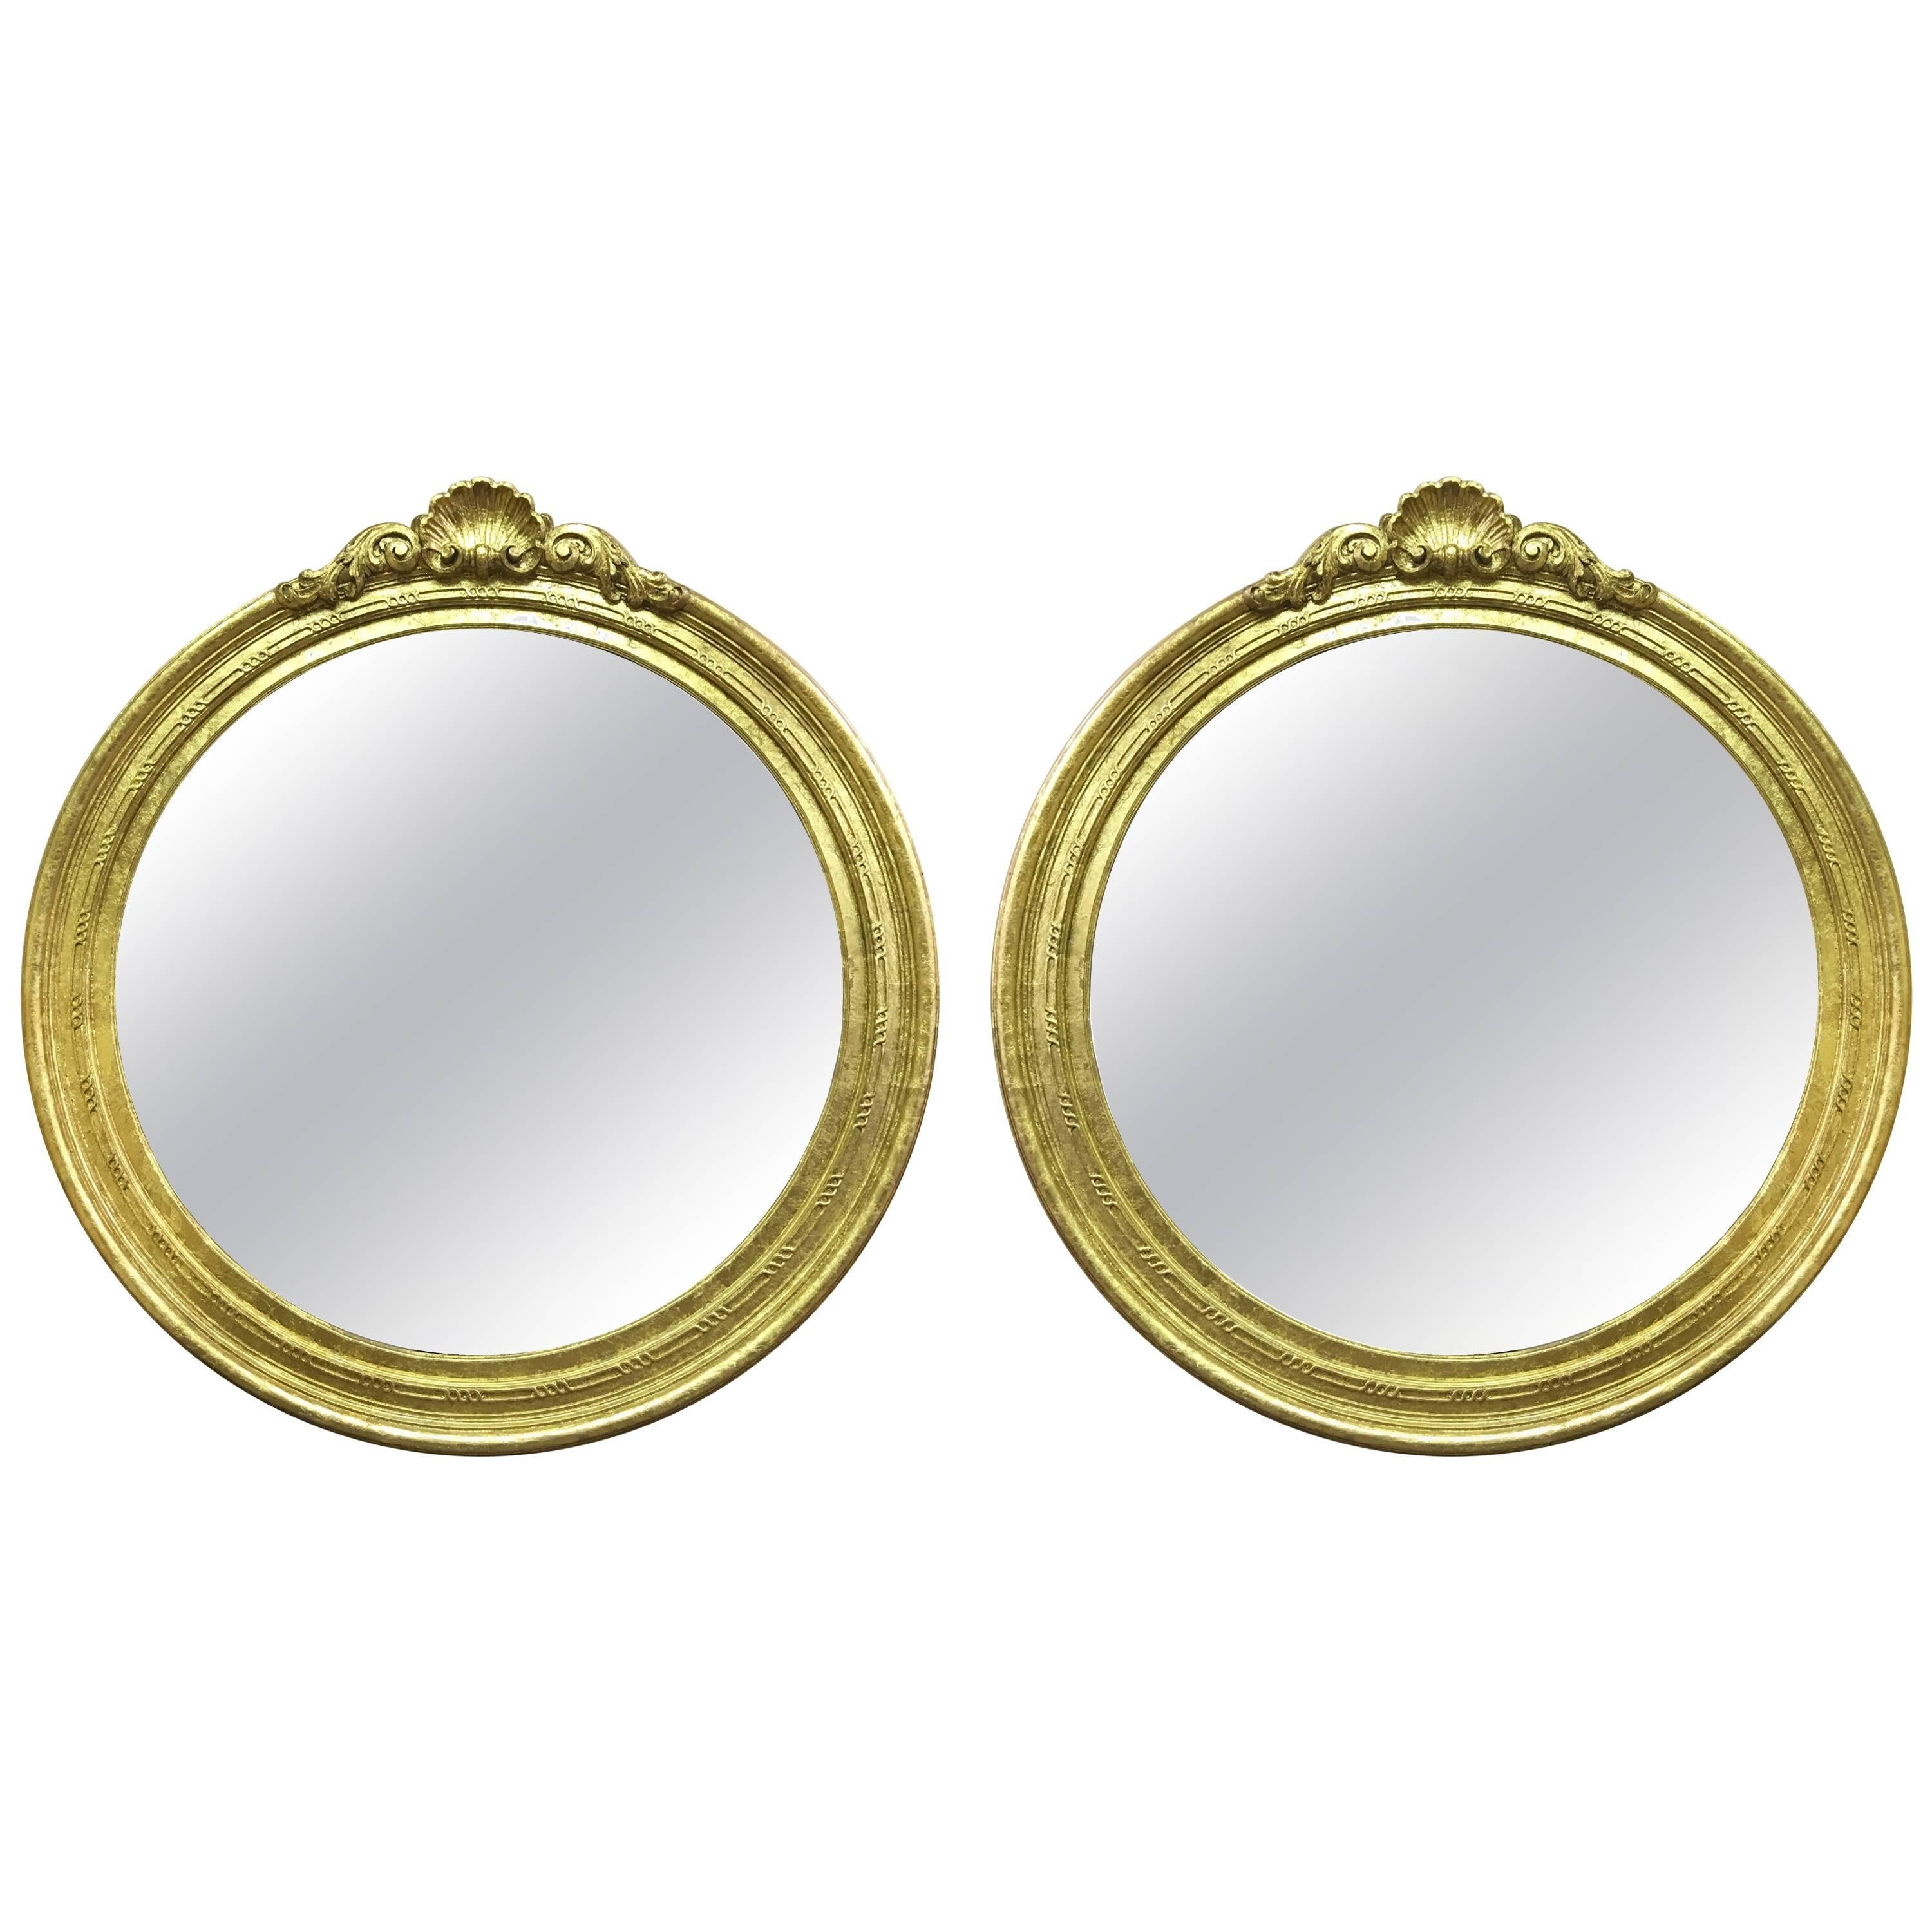 Pair of 19th Century, Majestic Gold Leaf Mirrors For Sale